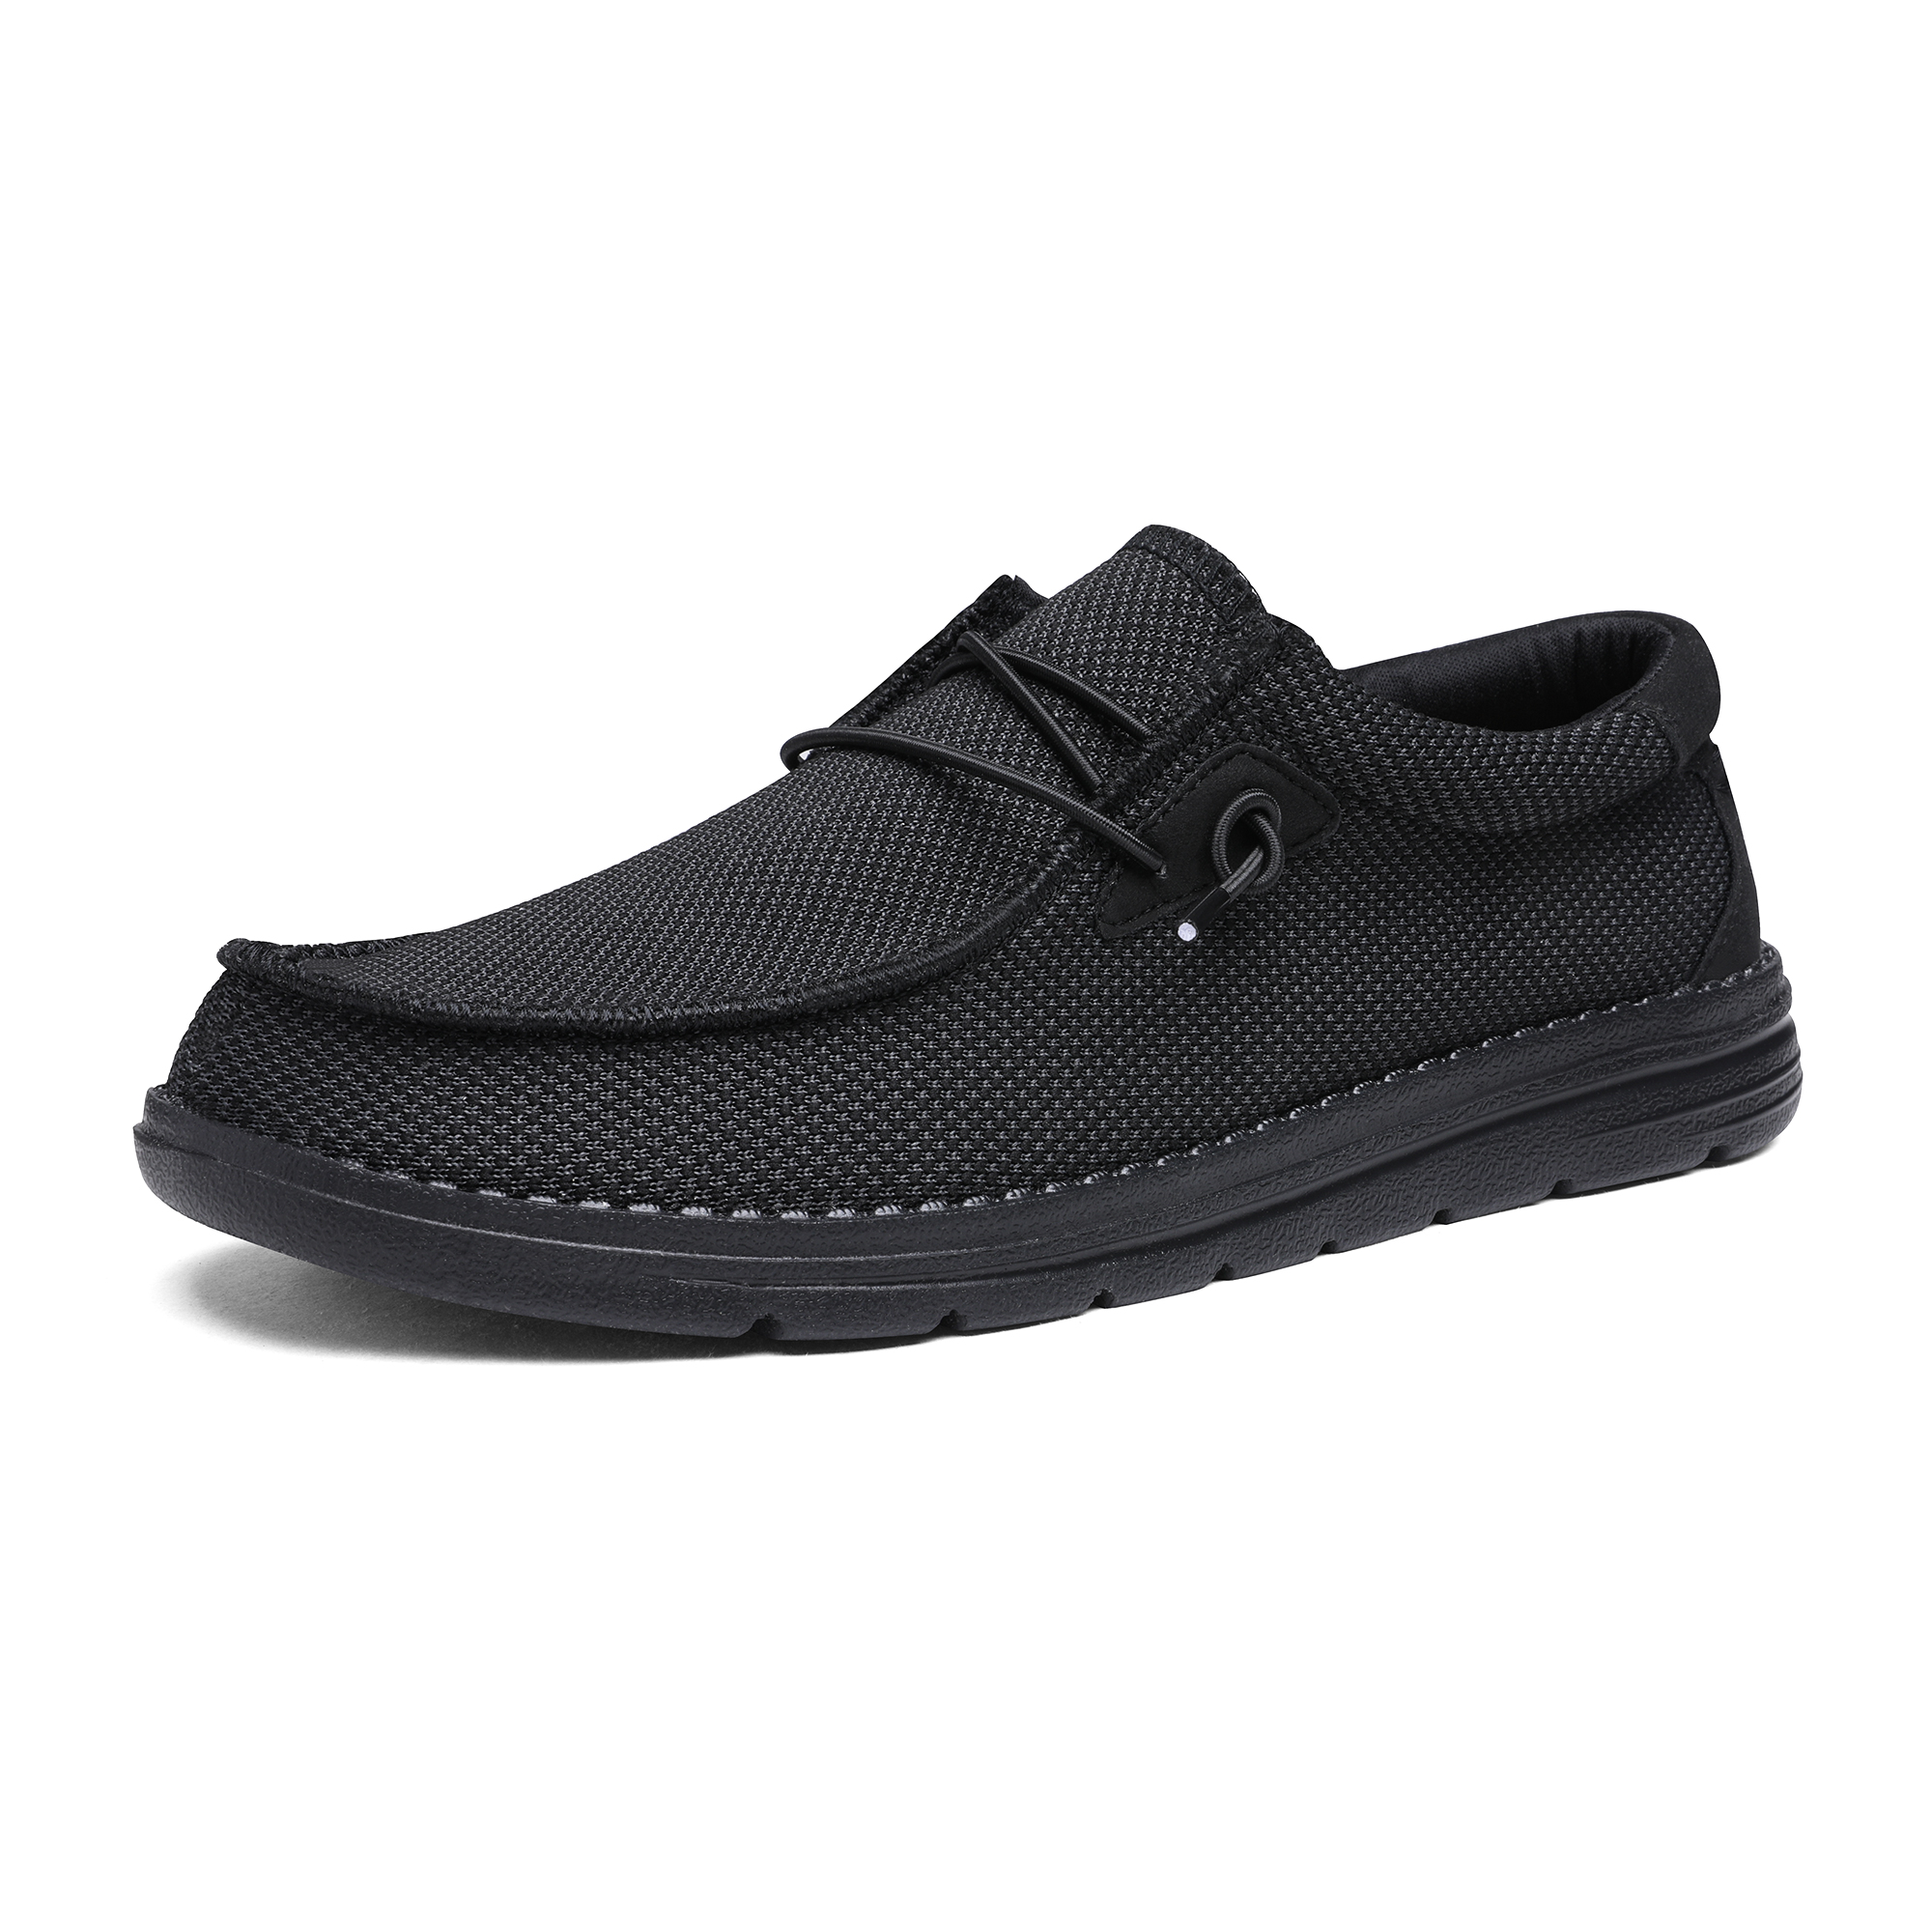 Bruno Marc Men's Comfort Tennis Shoes Casual Slip-on Loafers Lightweight Stretch Shoes Outdoor Indoor Sneakers BLS211 BLACK Size 11 - image 1 of 5